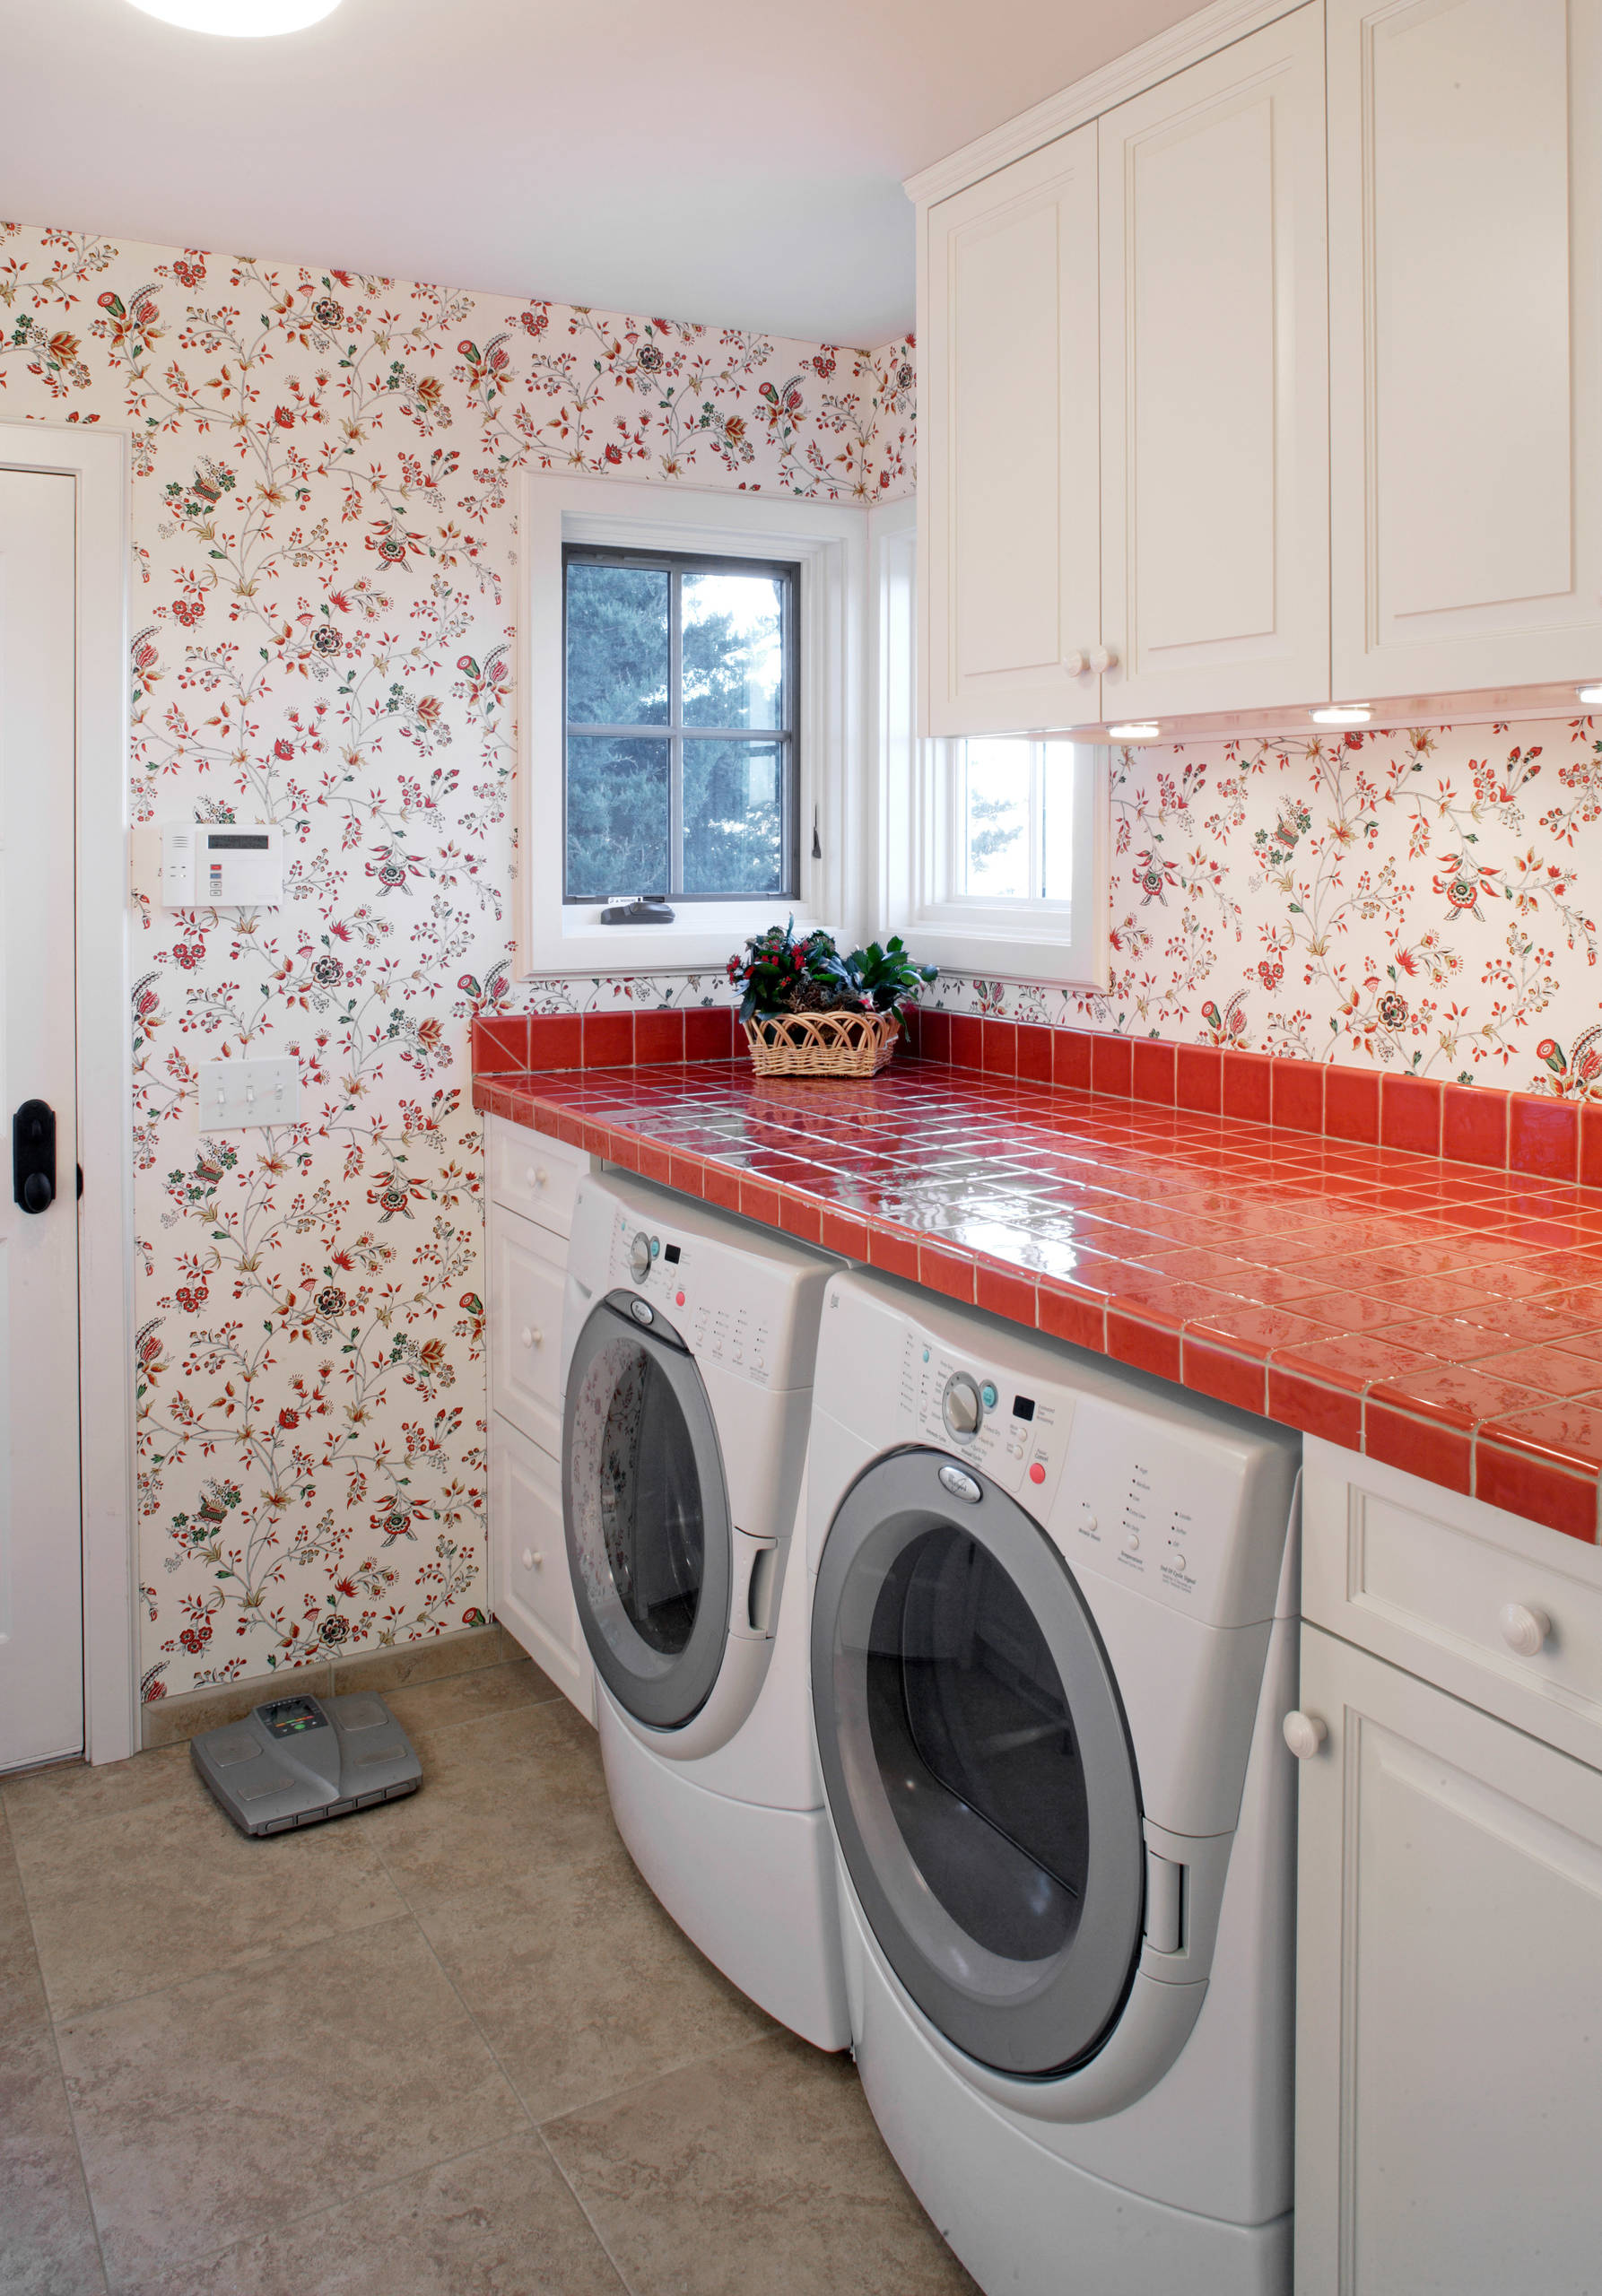 75 Laundry Room with Tile Countertops Ideas You'll Love - January